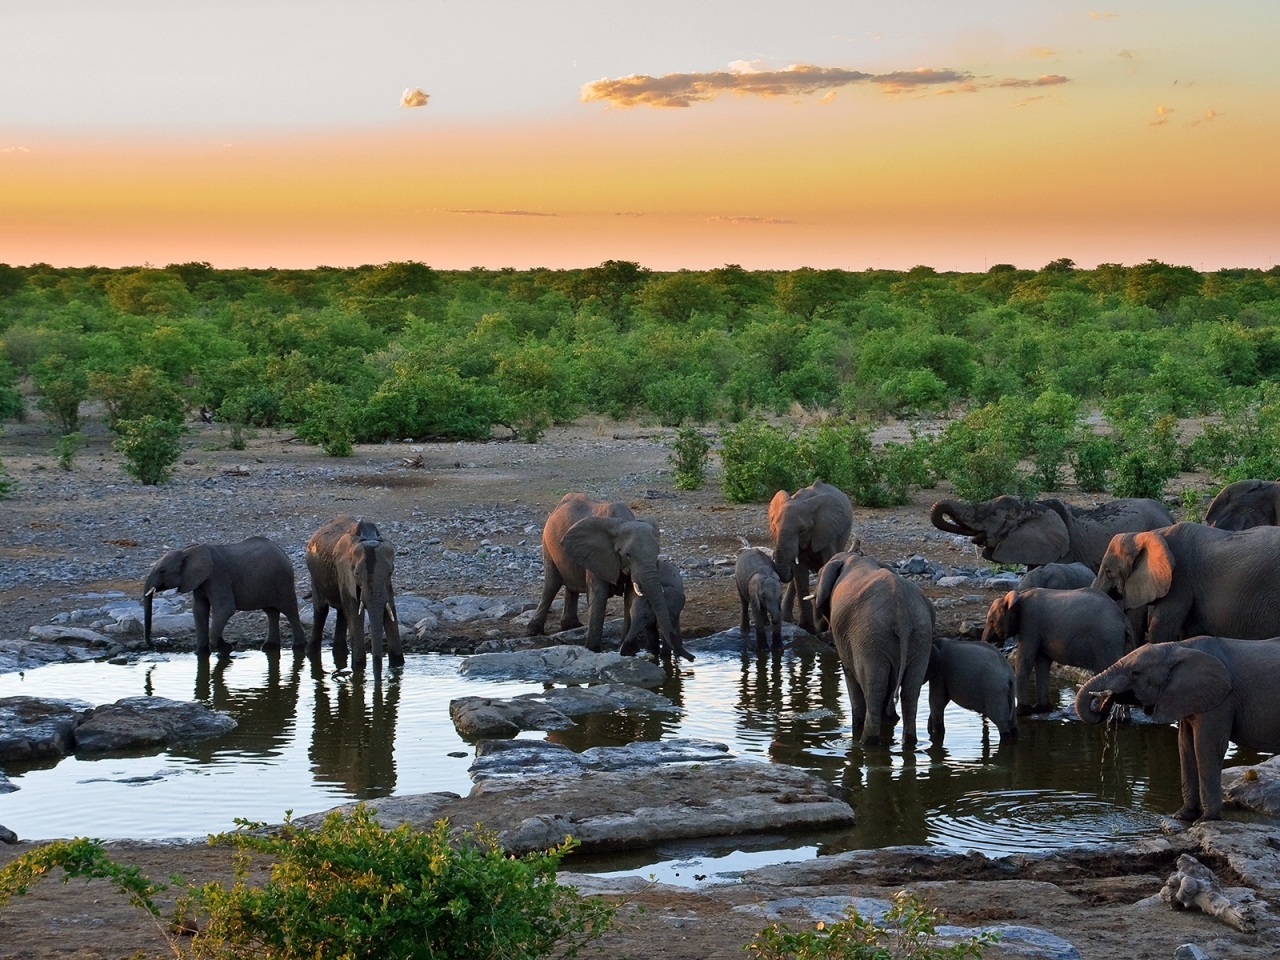 Sunset with Elephants for 1280 x 960 resolution